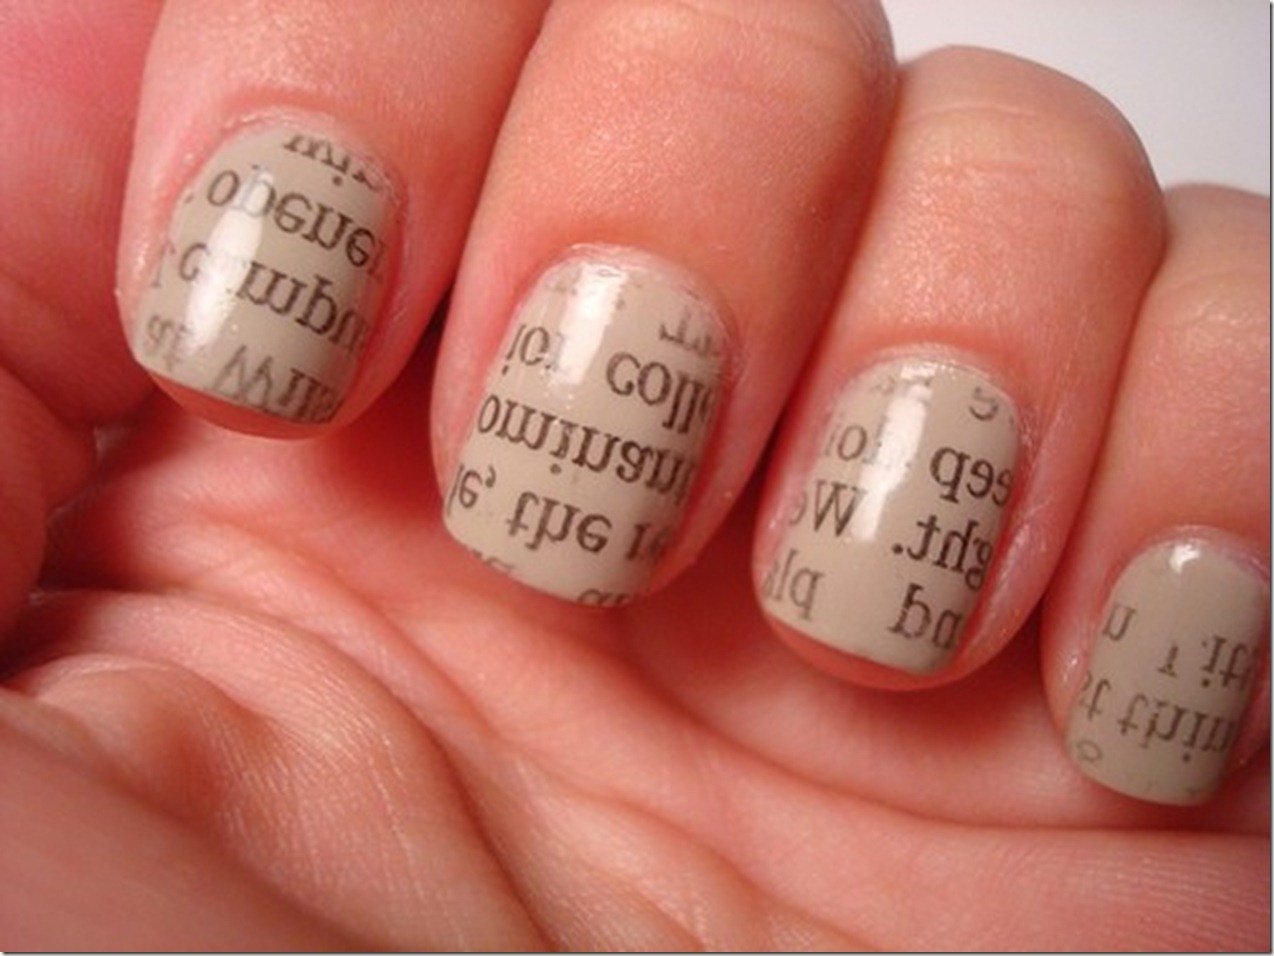 1. How to Create Newspaper Nail Art with Vodka - wide 2